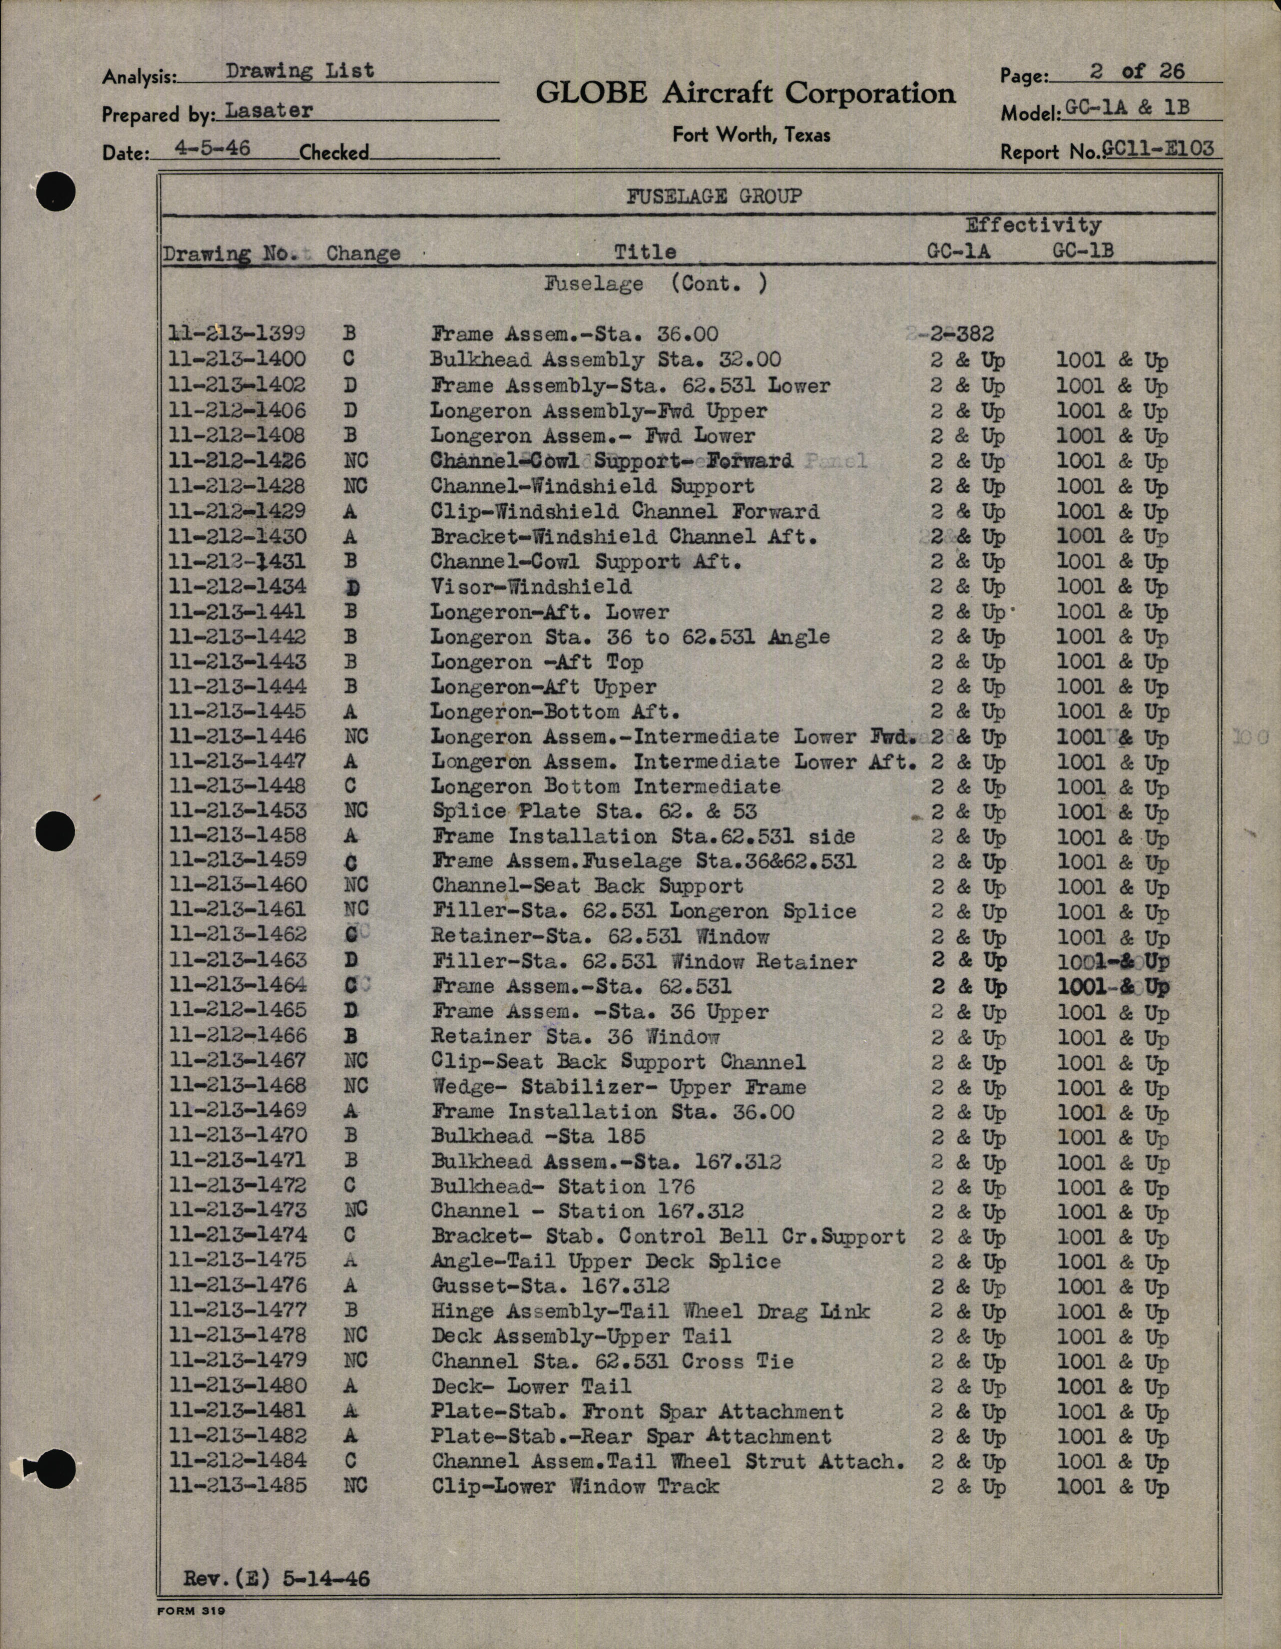 Sample page 5 from AirCorps Library document: Globe Drawing List